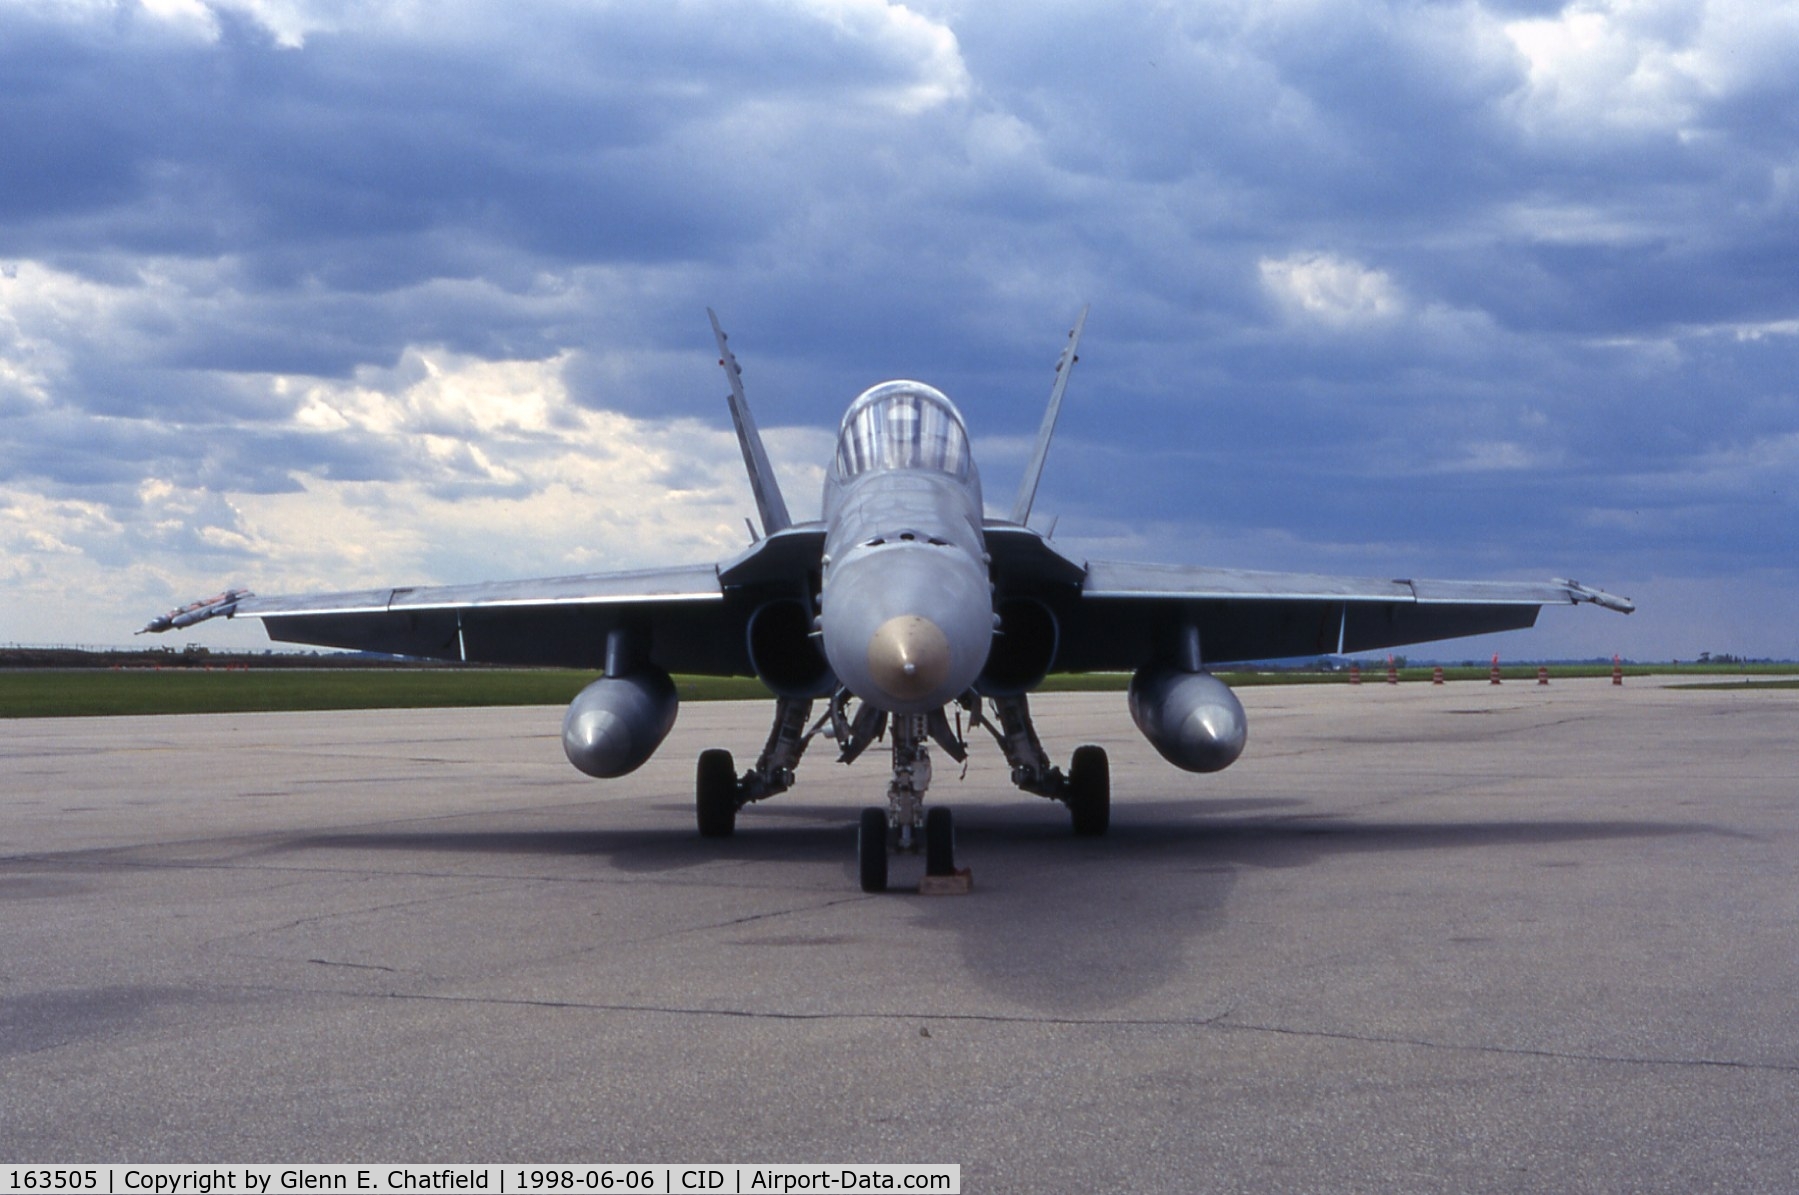 163505, 1988 McDonnell Douglas F/A-18C Hornet C/N 0749, F/A-18C stopping in for a visit